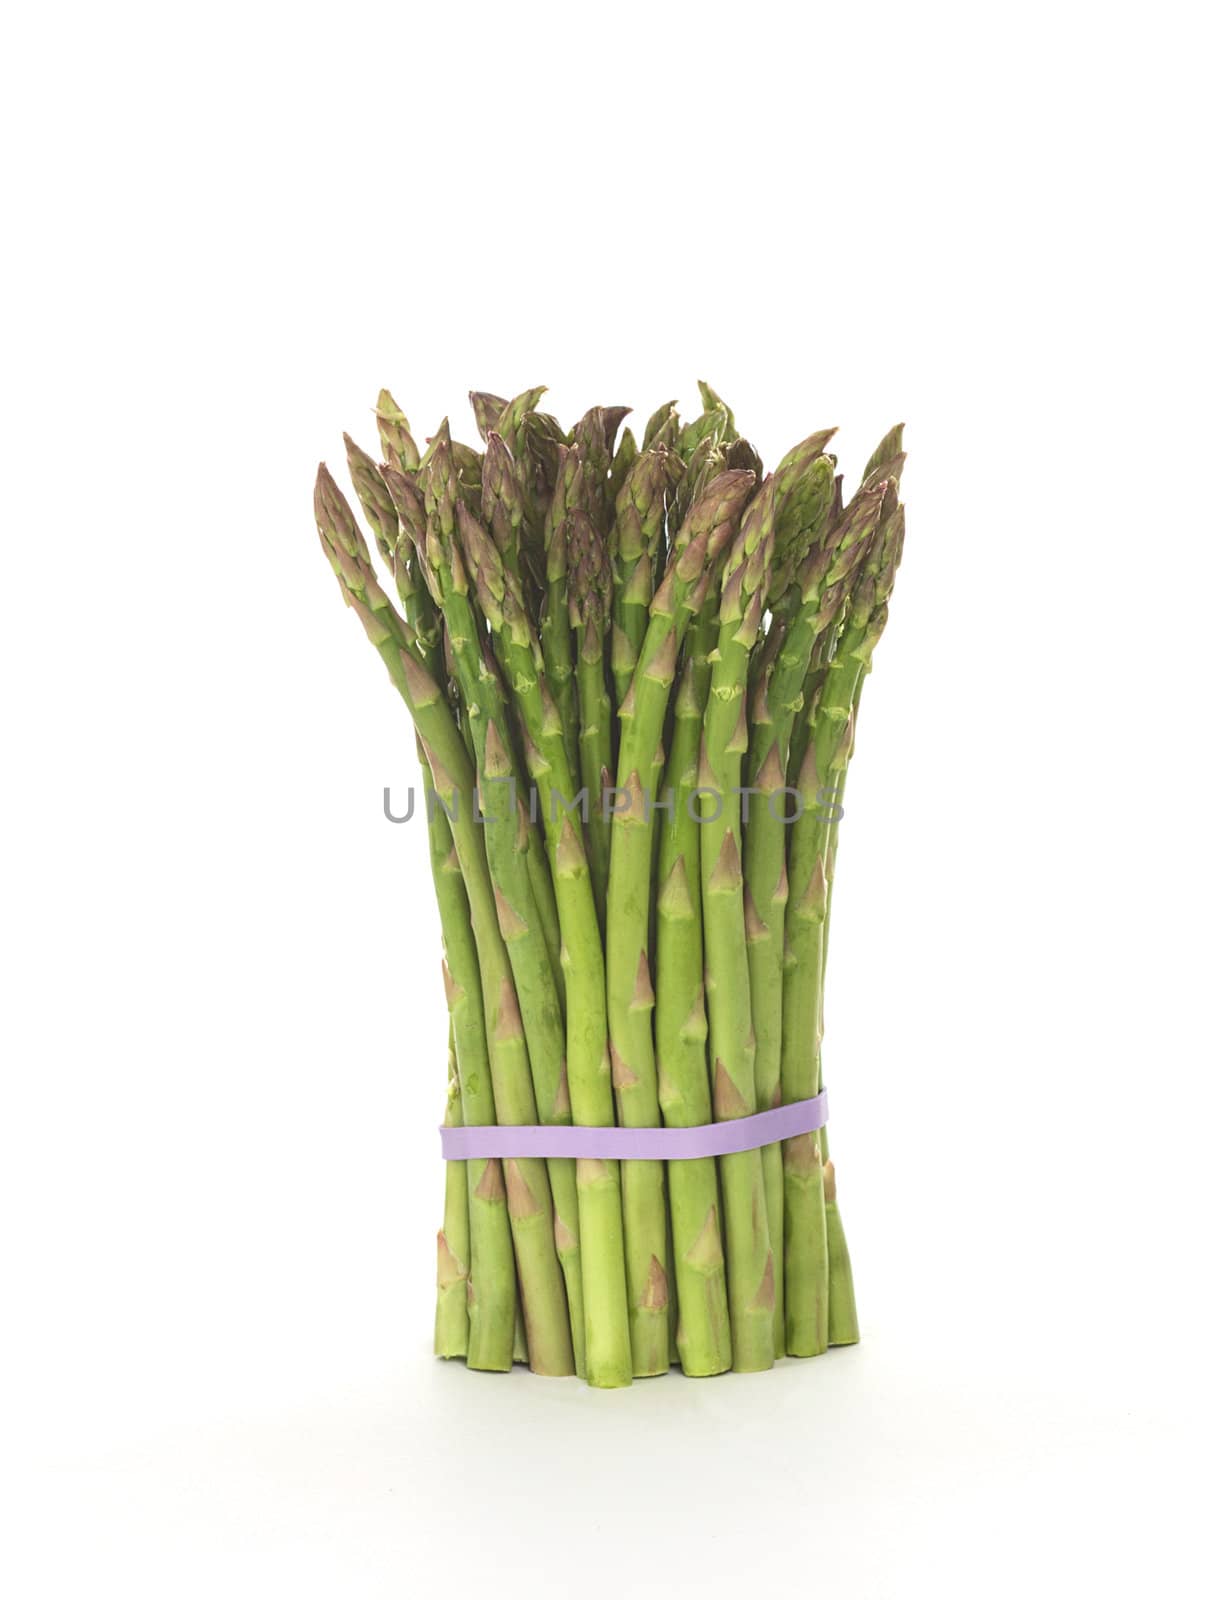 Raw green asparagus bunch held together by an elastic band standing on white 